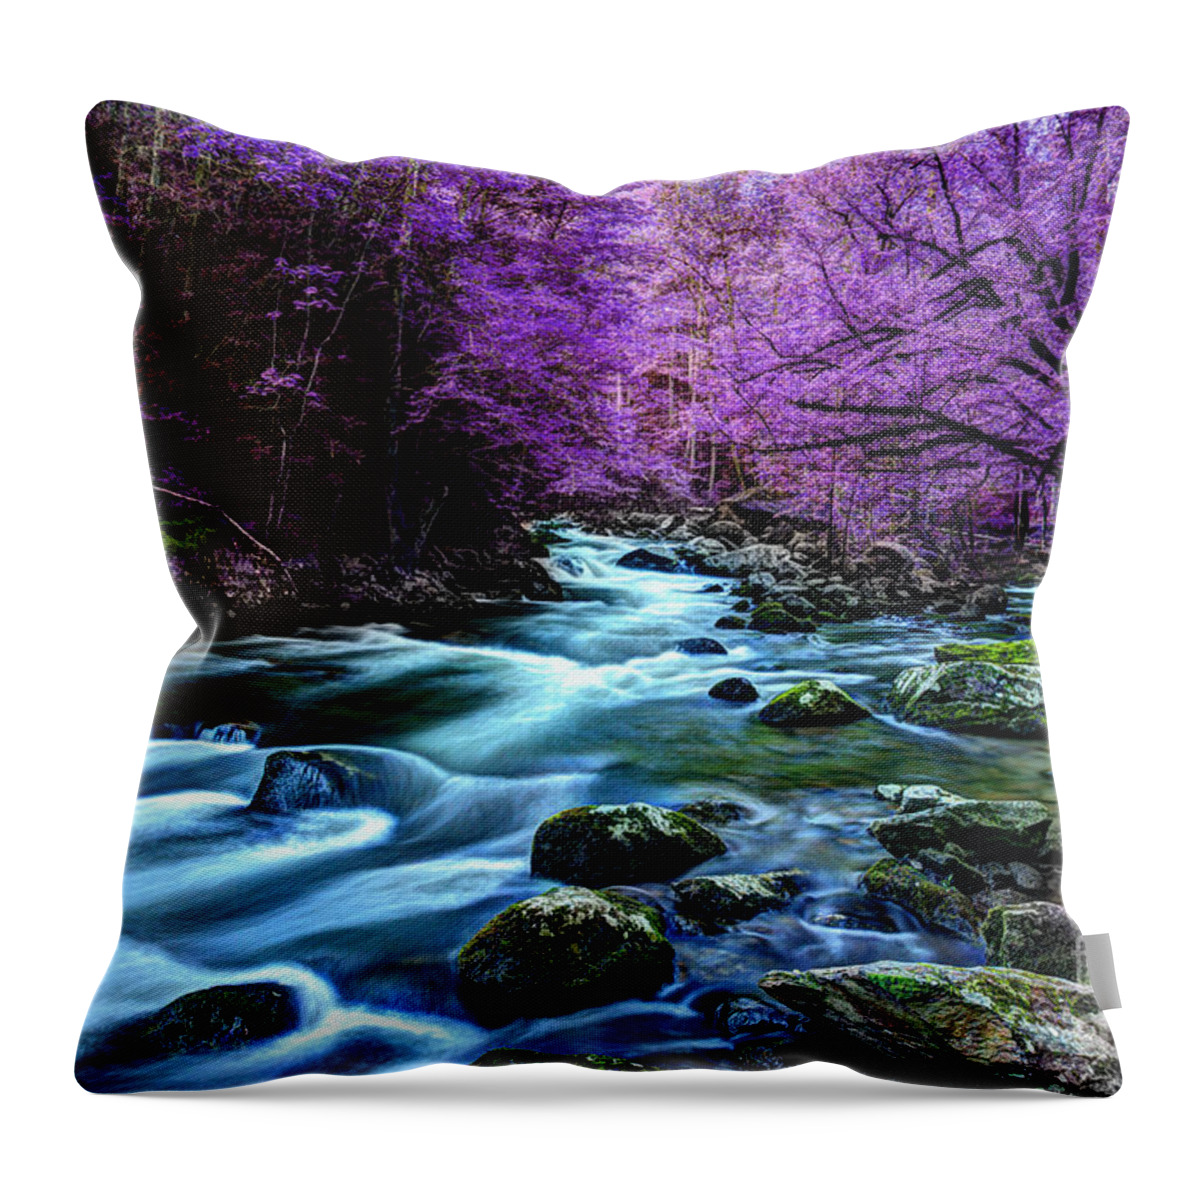 River Scene Throw Pillow featuring the photograph Living In Yesterday's Dream by Michael Eingle